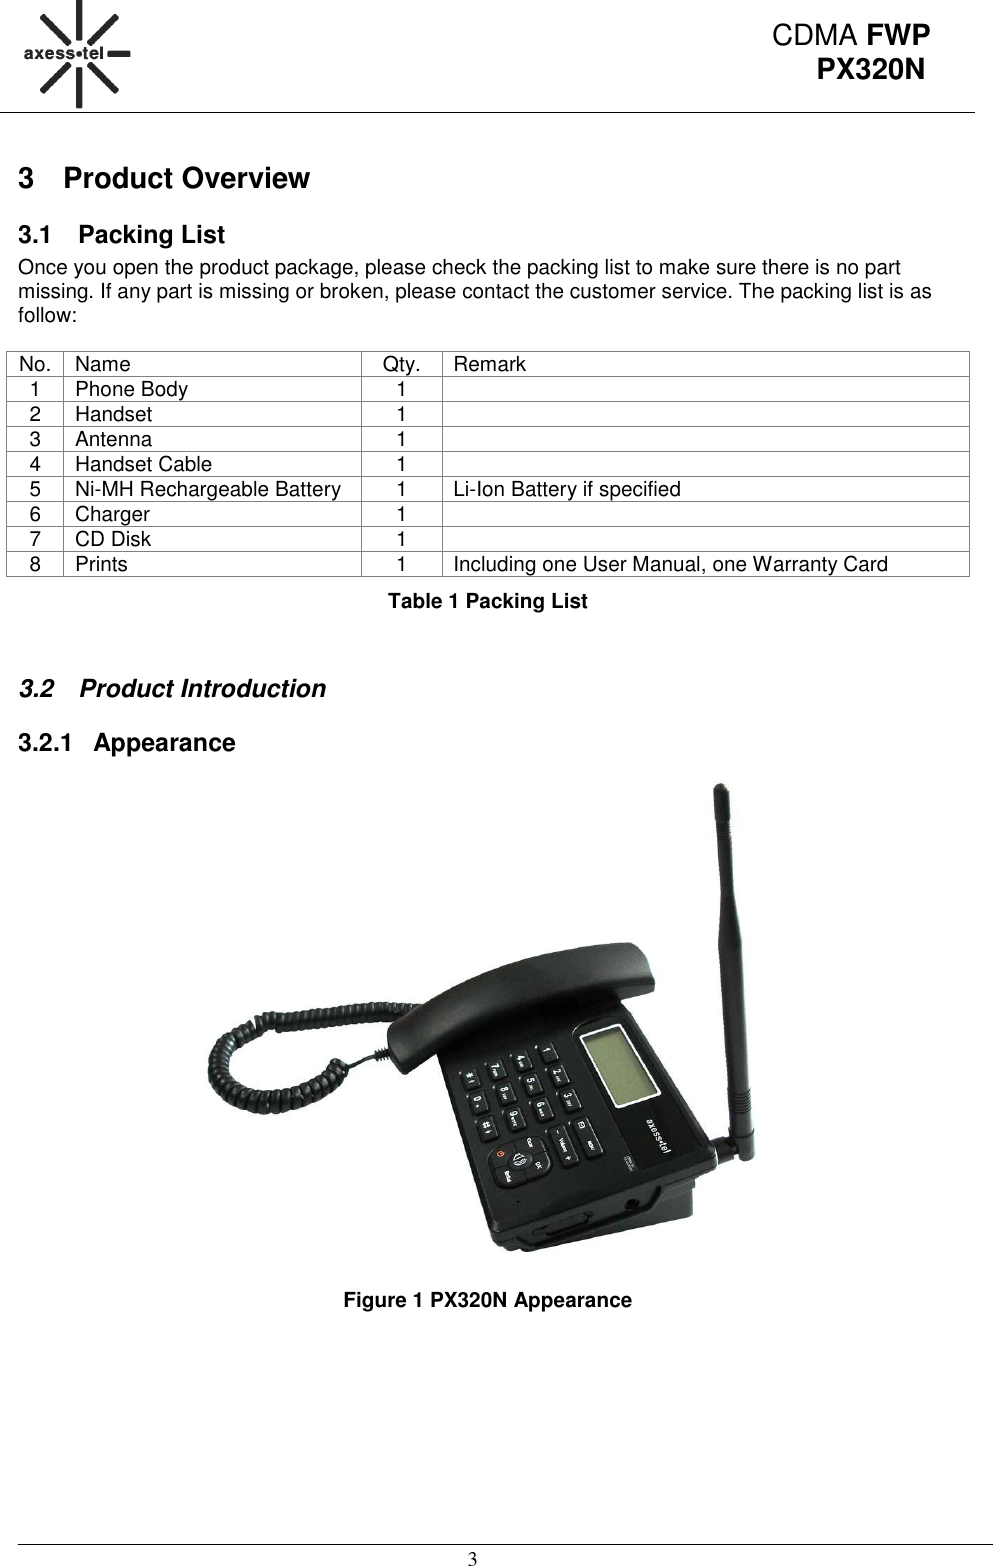                                                                                                      3 CDMA FWP PX320N 3  Product Overview 3.1  Packing List Once you open the product package, please check the packing list to make sure there is no part missing. If any part is missing or broken, please contact the customer service. The packing list is as follow:  No. Name Qty. Remark 1 Phone Body 1  2 Handset 1  3 Antenna 1  4 Handset Cable 1  5 Ni-MH Rechargeable Battery 1 Li-Ion Battery if specified 6 Charger 1  7 CD Disk 1  8 Prints 1 Including one User Manual, one Warranty Card Table 1 Packing List  3.2  Product Introduction 3.2.1  Appearance  Figure 1 PX320N Appearance 